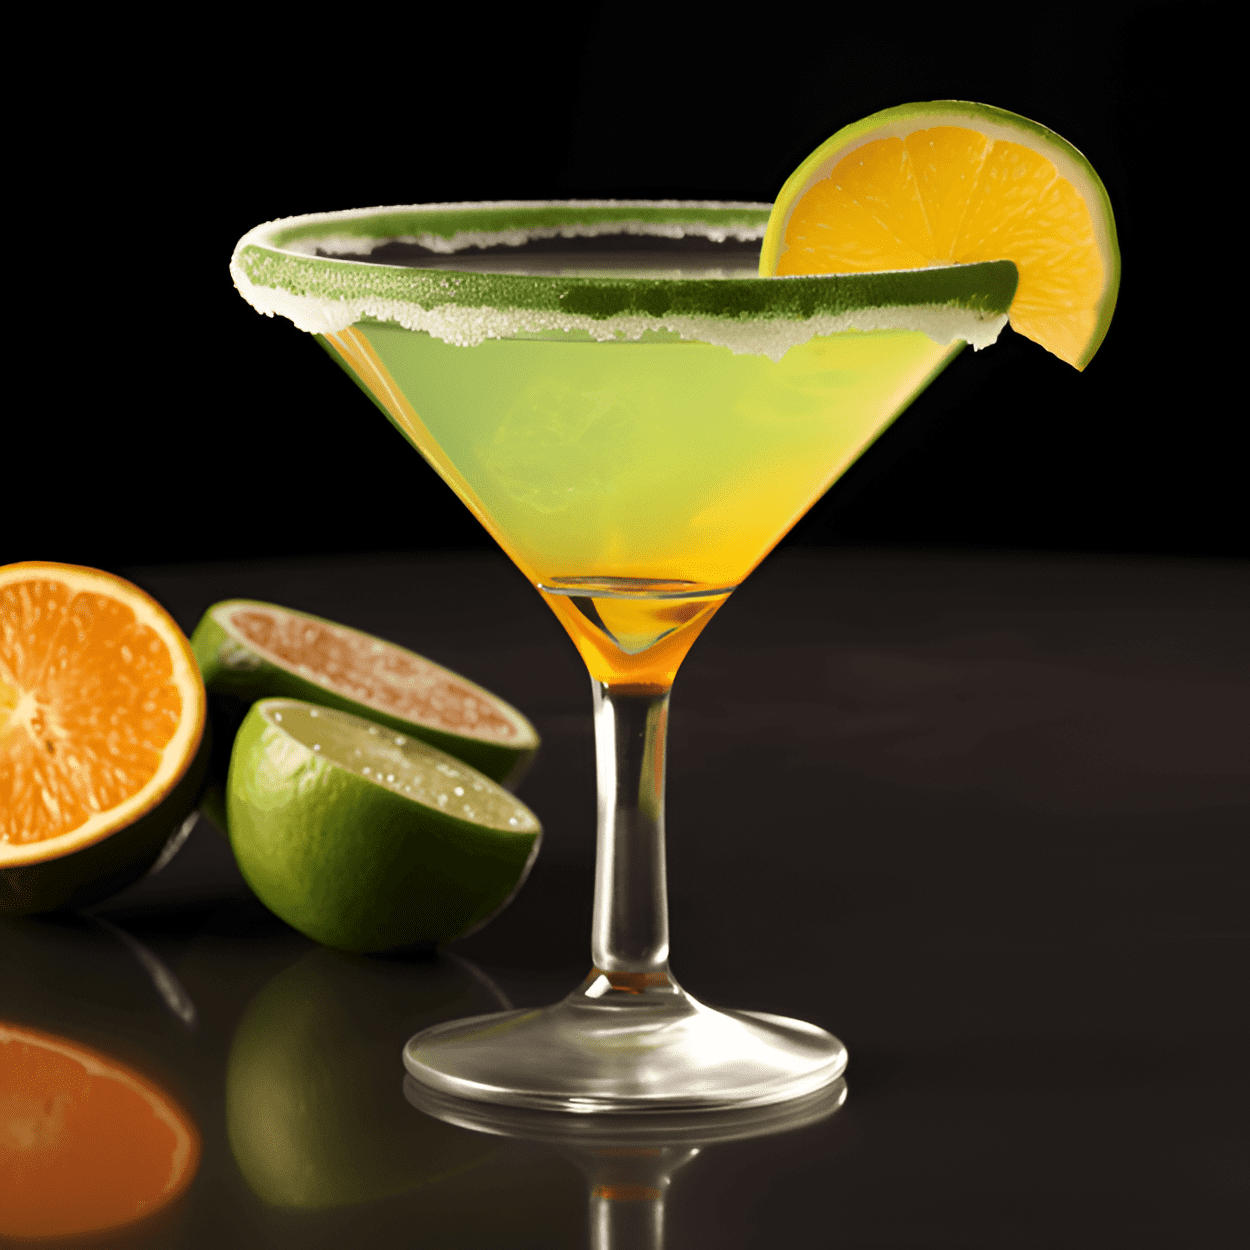 Outer Rim Cocktail Recipe - The Outer Rim cocktail is a delightful blend of sweet, sour, and salty. The tangy passion fruit and citrus flavors are balanced by the sweetness of the agave, while the black salt rim adds a surprising salty twist.